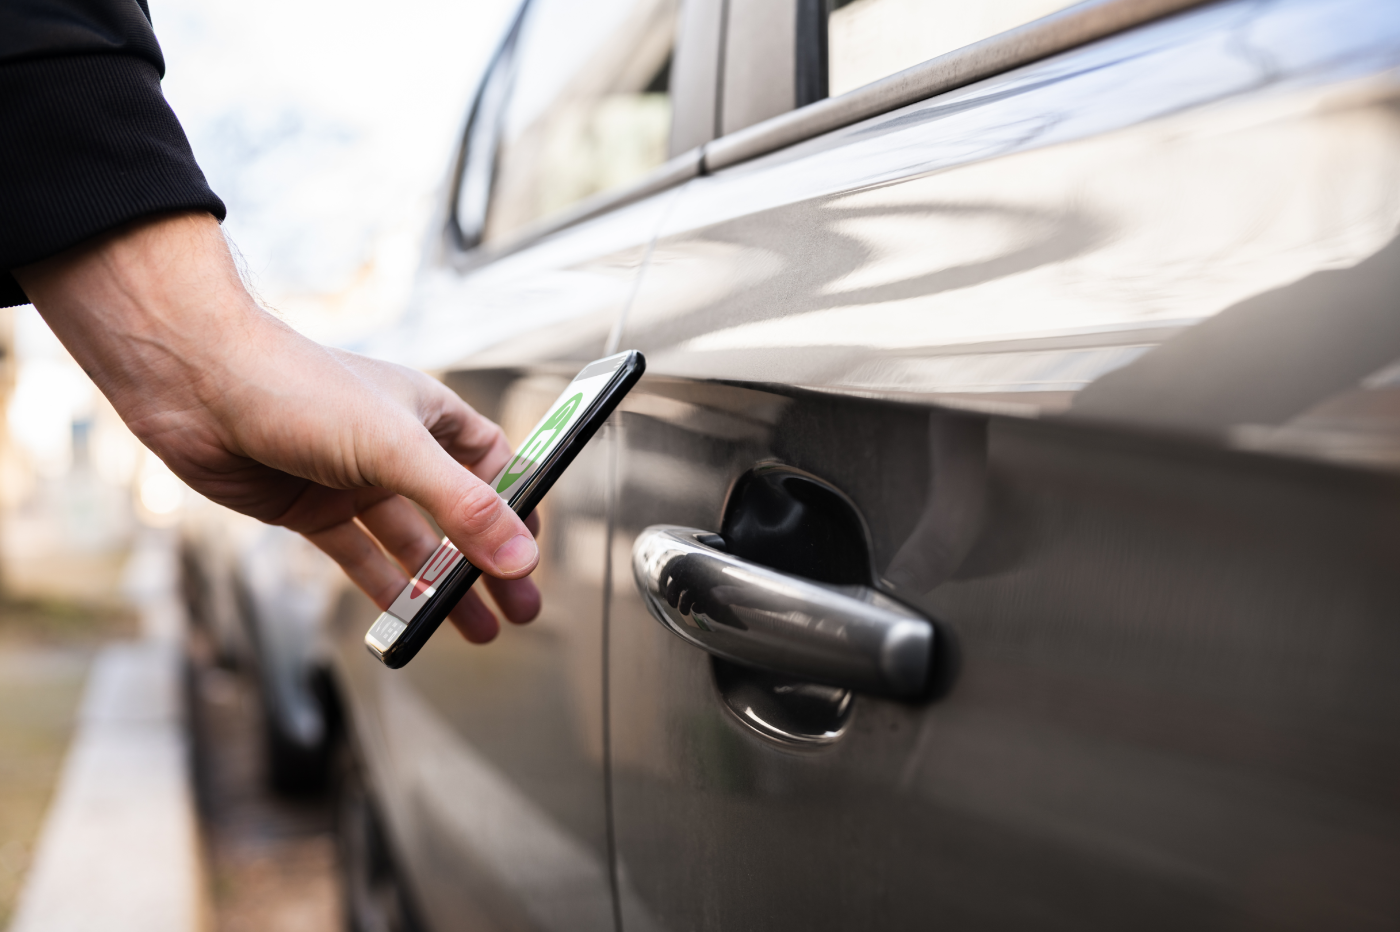 Opening of a car door with a smartphone